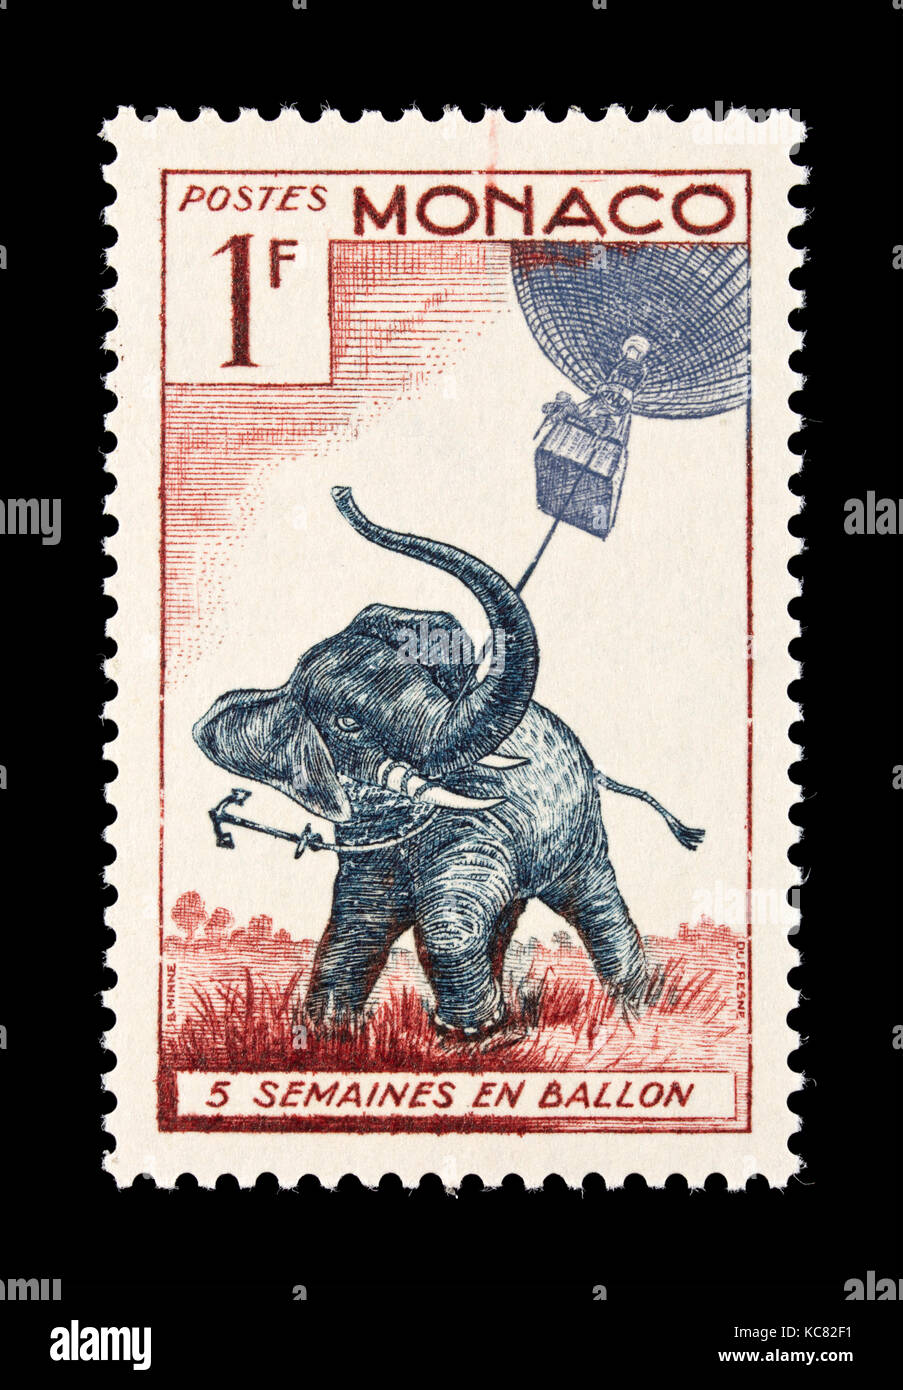 Postage stamp from Monaco depicting an elephant and a balloon, scene from a Jules Verne book 'Five Weeks in a Balloon' Stock Photo